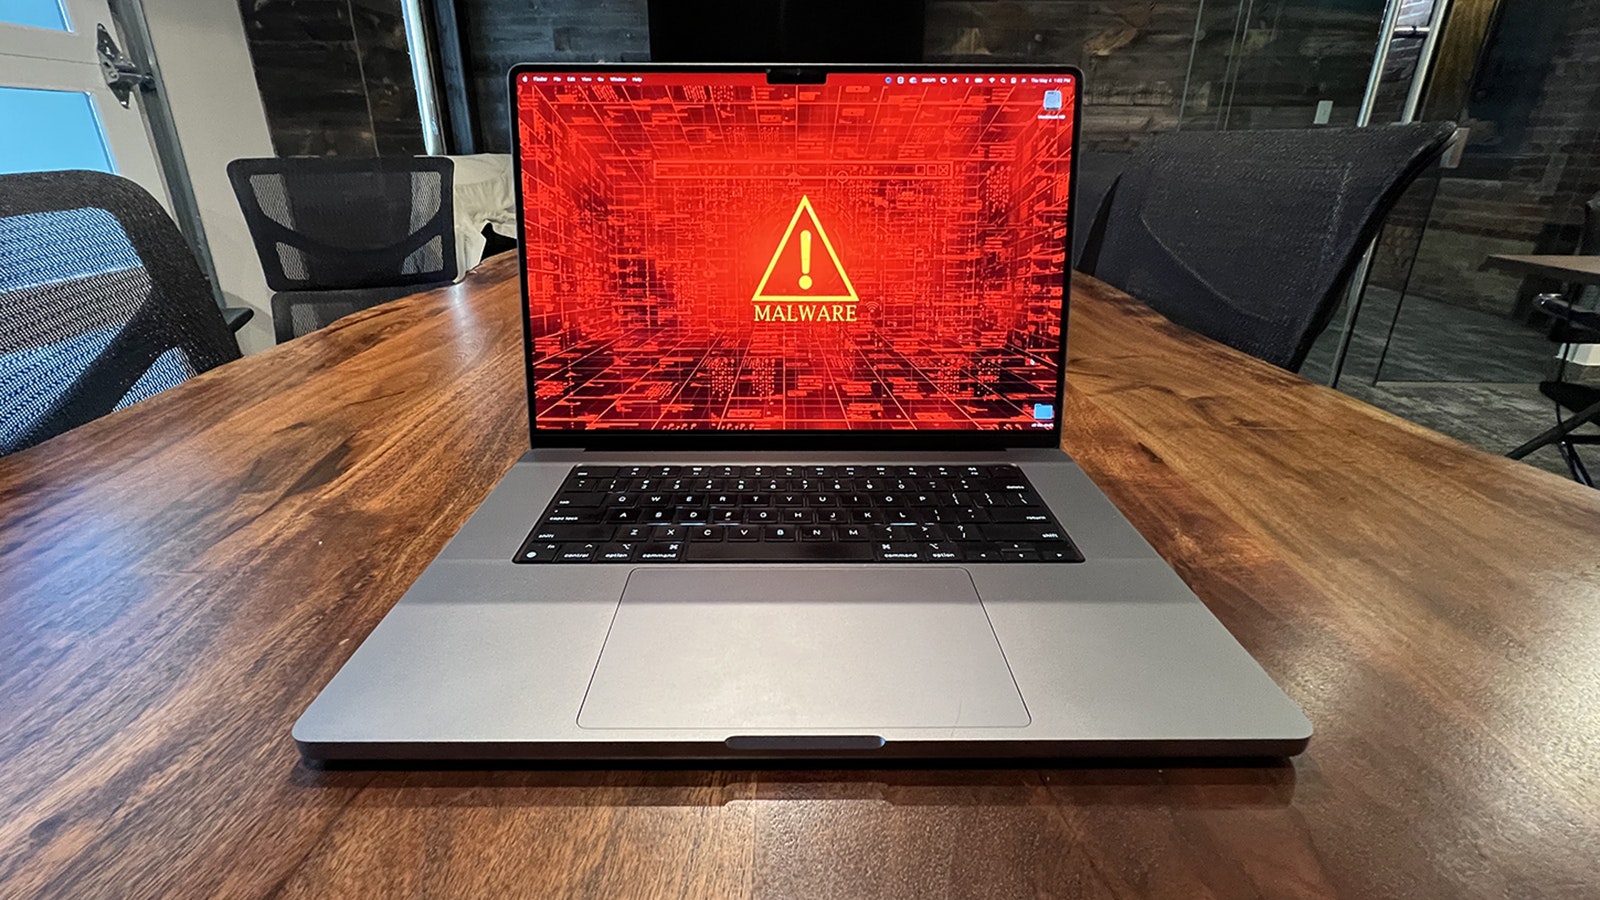 Apple computers and devices, once believed relatively secure from hackers and malware, are becoming more vulnerable to cybersecurity risks.